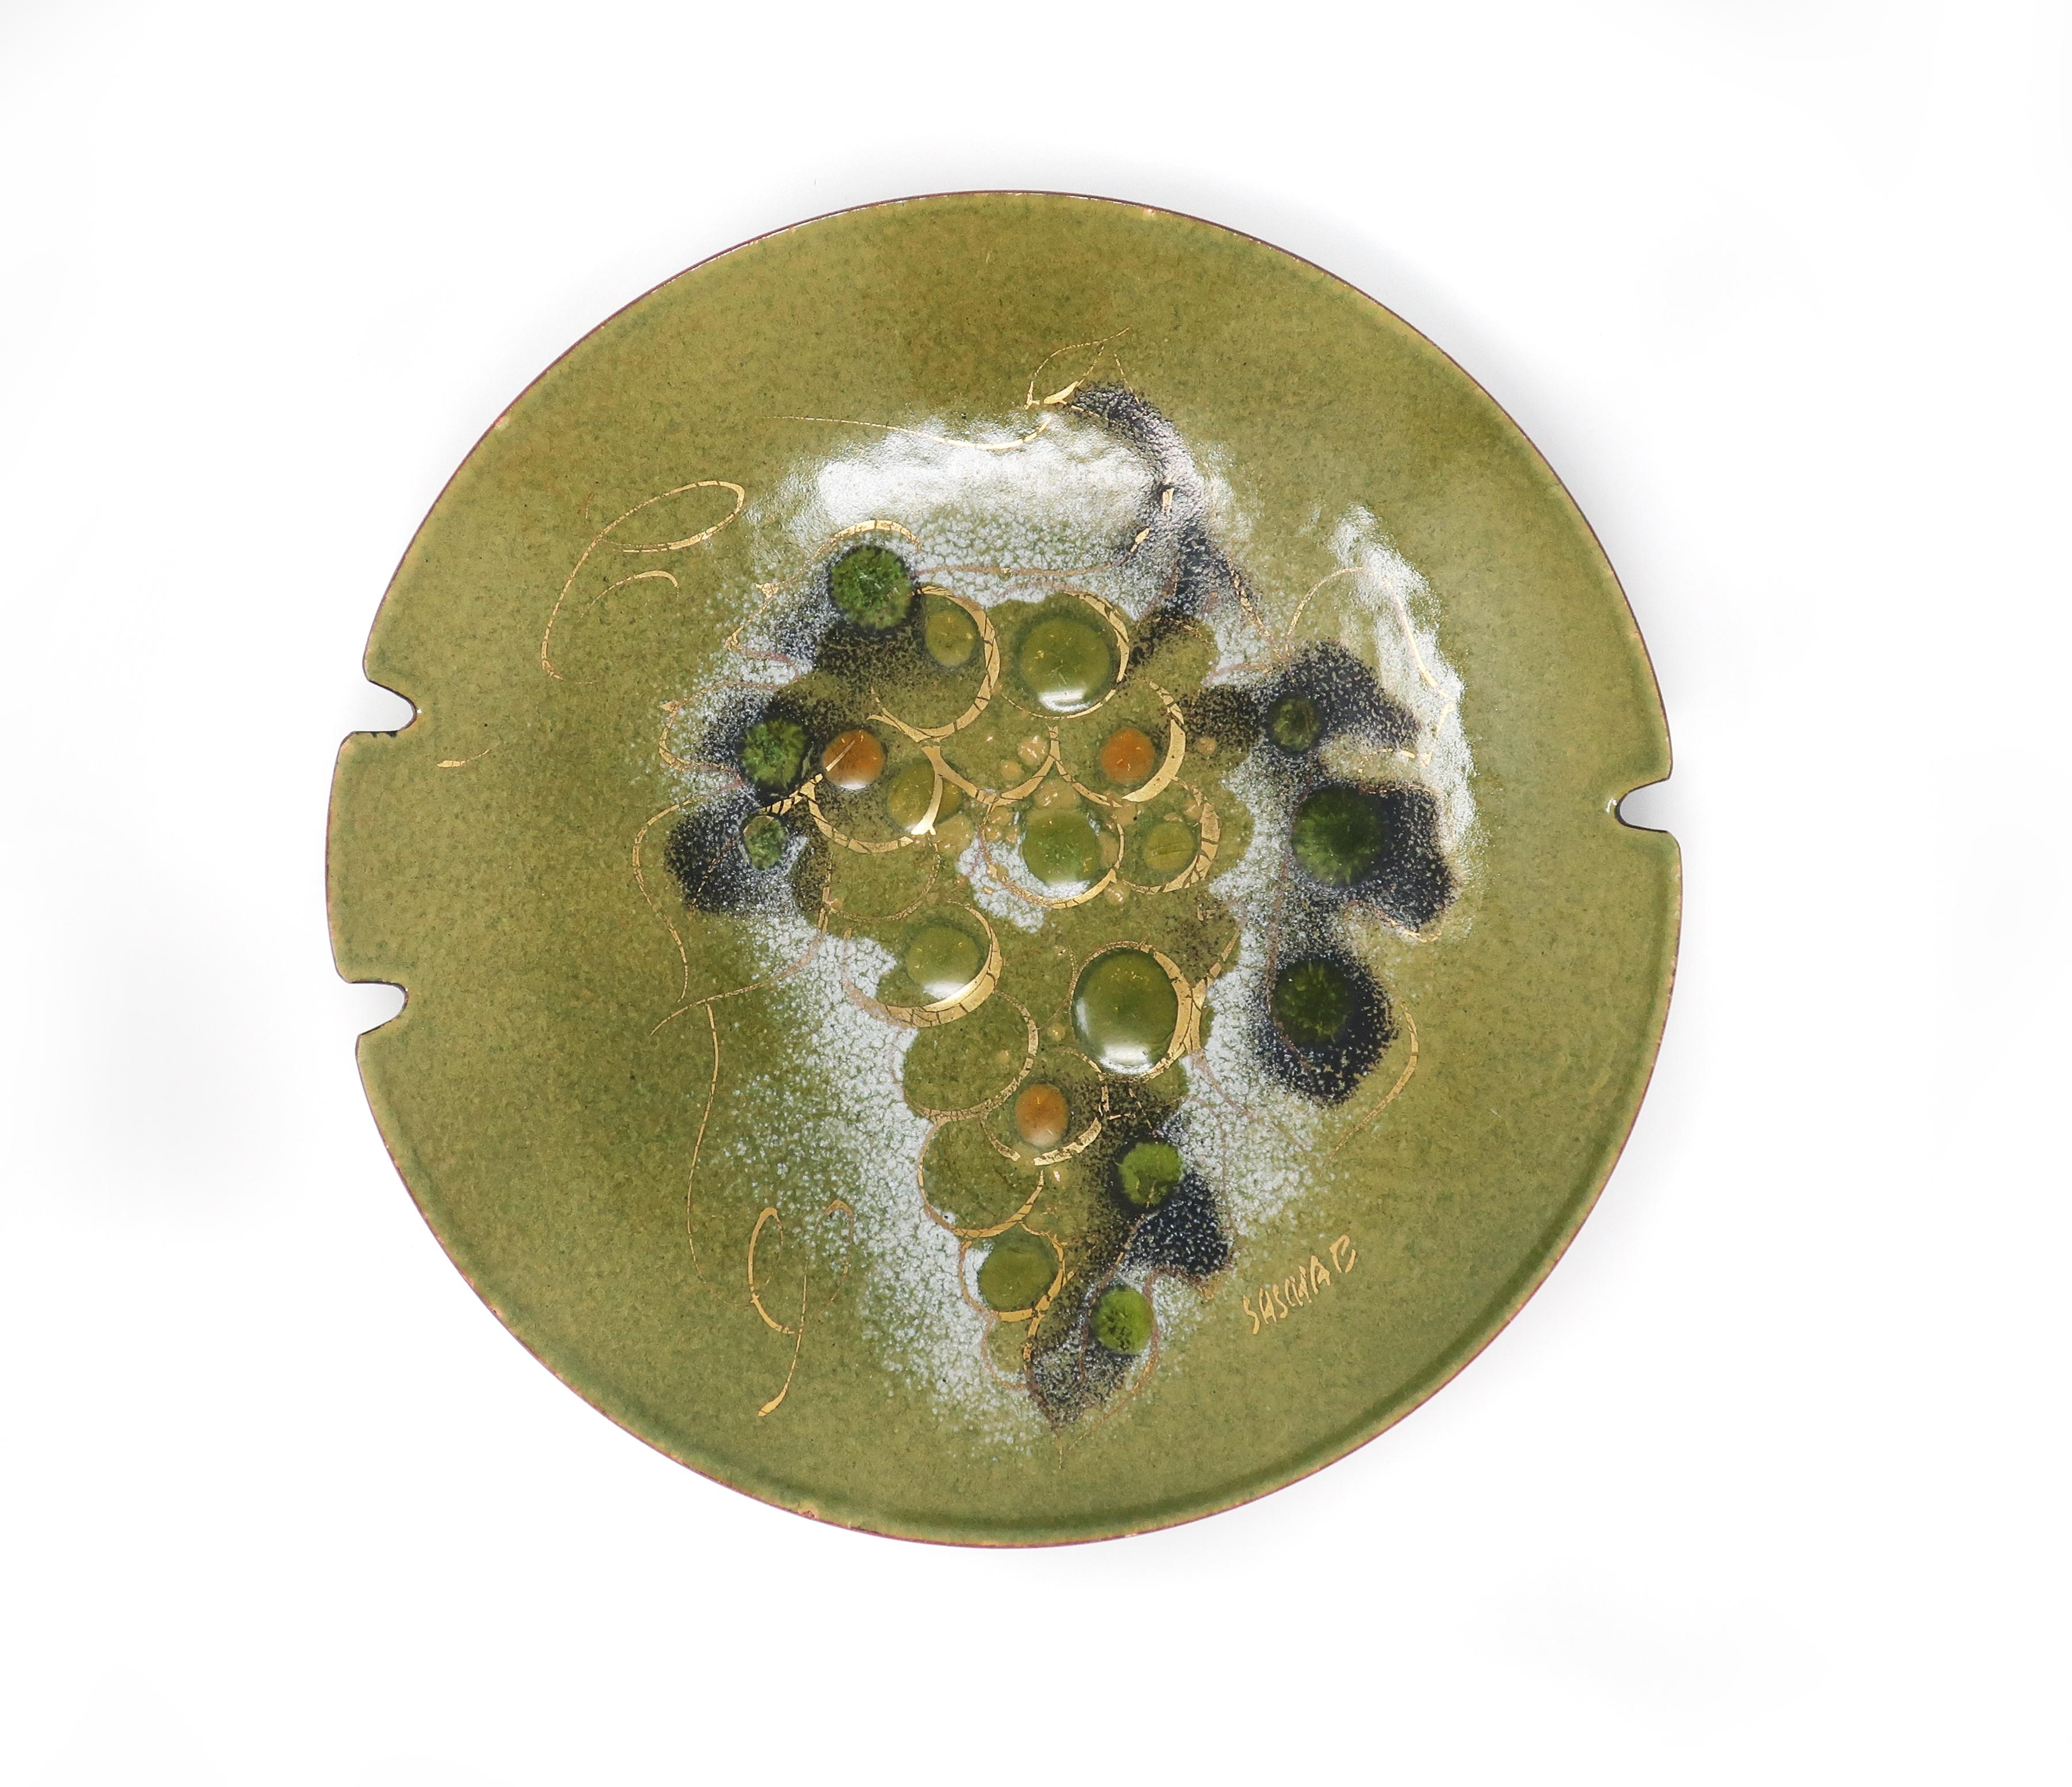 A fantastic example of California artist Sascha Brastoff’s Mid-Century Modern enamel on copper work. This ashtray features a bunch of grapes and leaves in greens, gold, orange, and dark grey. In excellent vintage condition and signed on front and